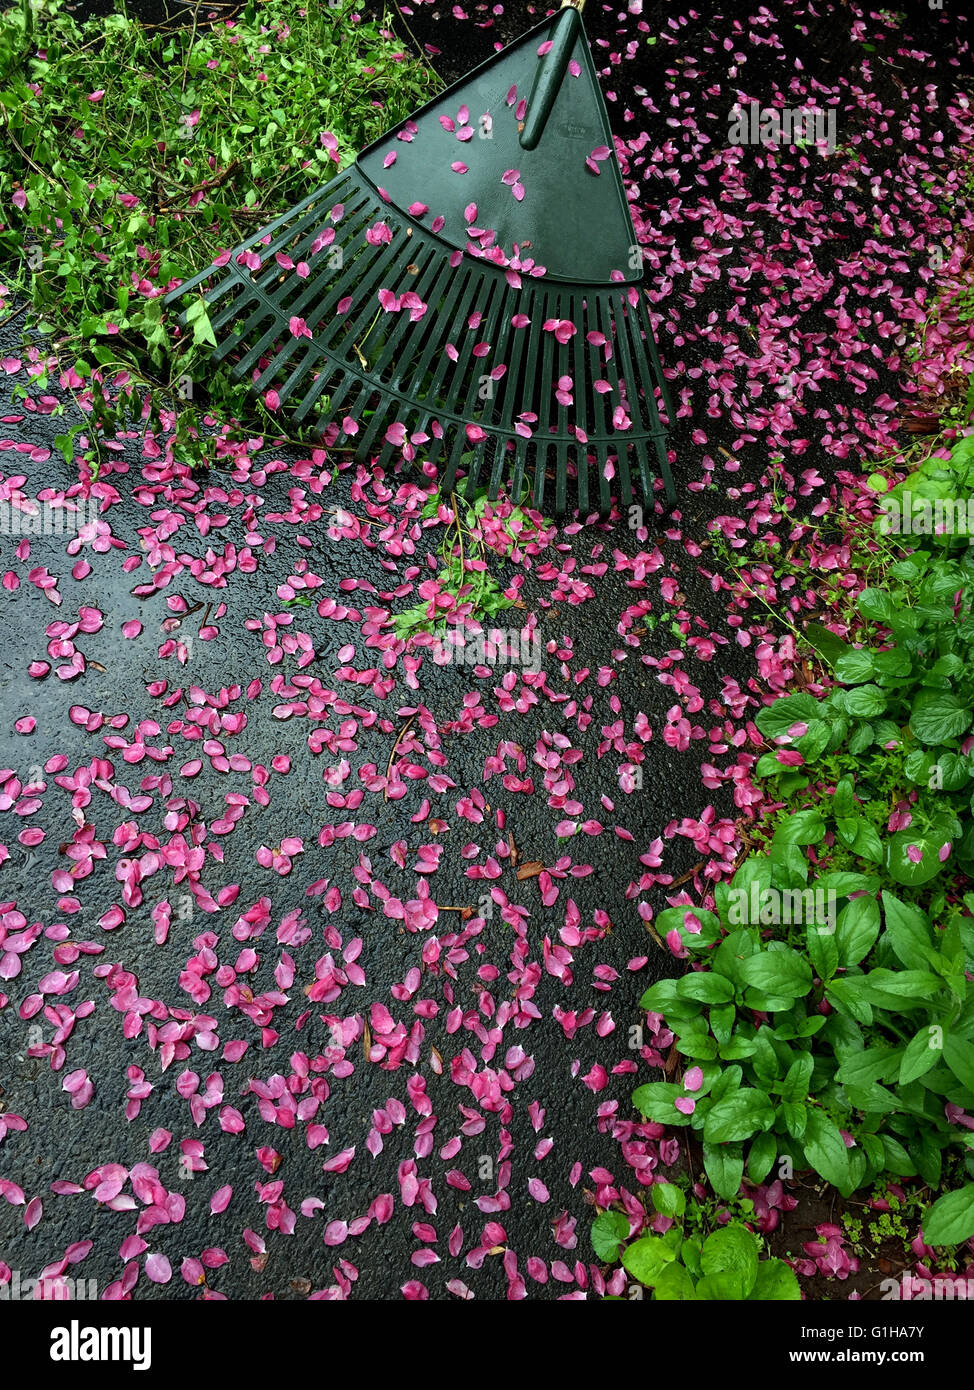 Pink flower petals on driveway. Stock Photo